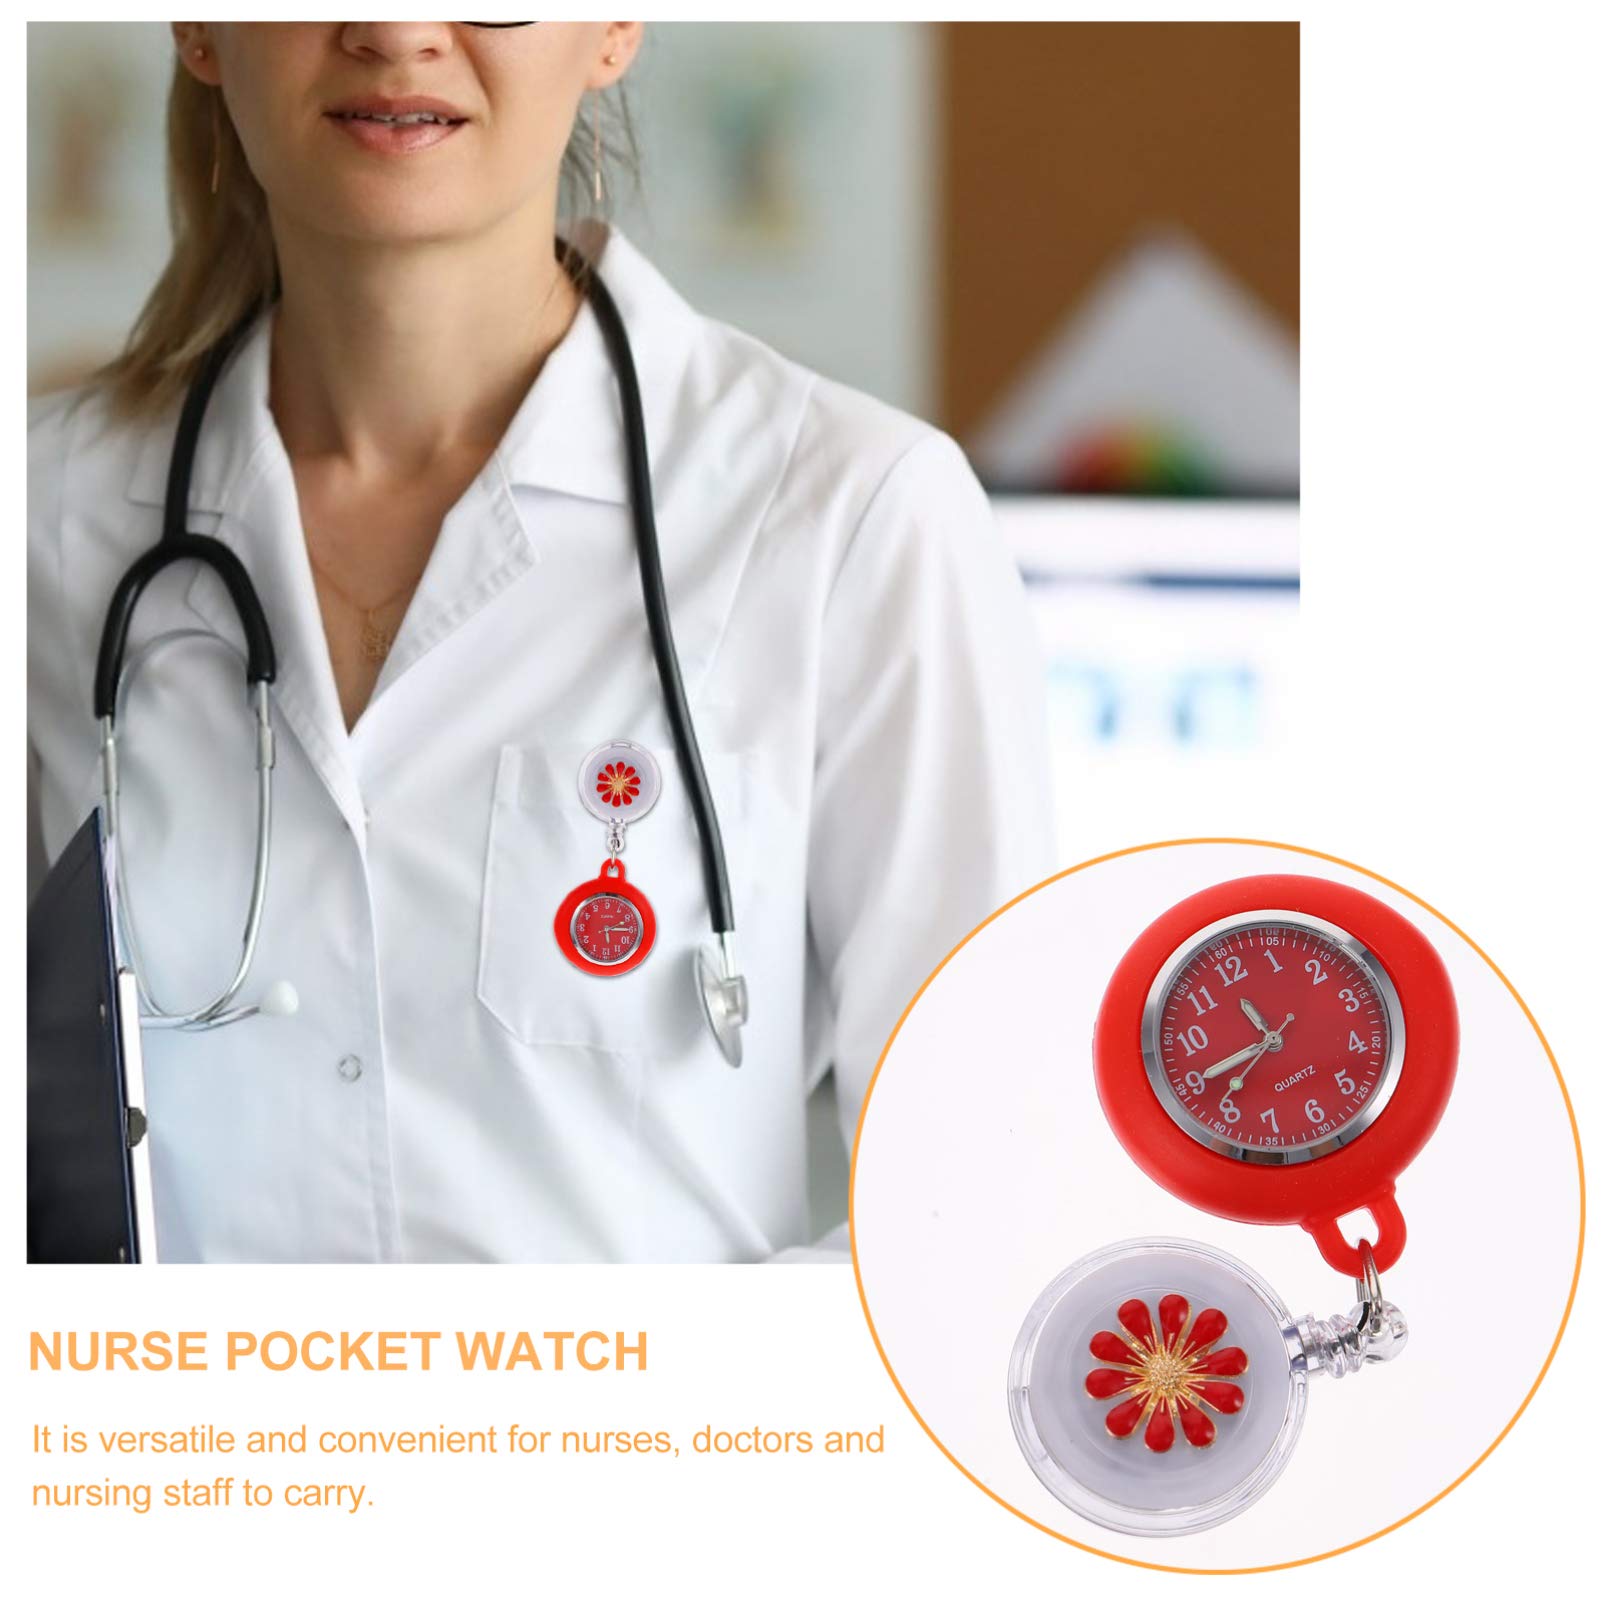 Hemobllo Womens Digital Watch Nurse Lapel Pin Watch Retractable Clip- on Hanging Doctor Pocket Watch Daisy Flower Movement Watch for 2021 New Year Graduation Students Gifts Red Student Nurse Badge